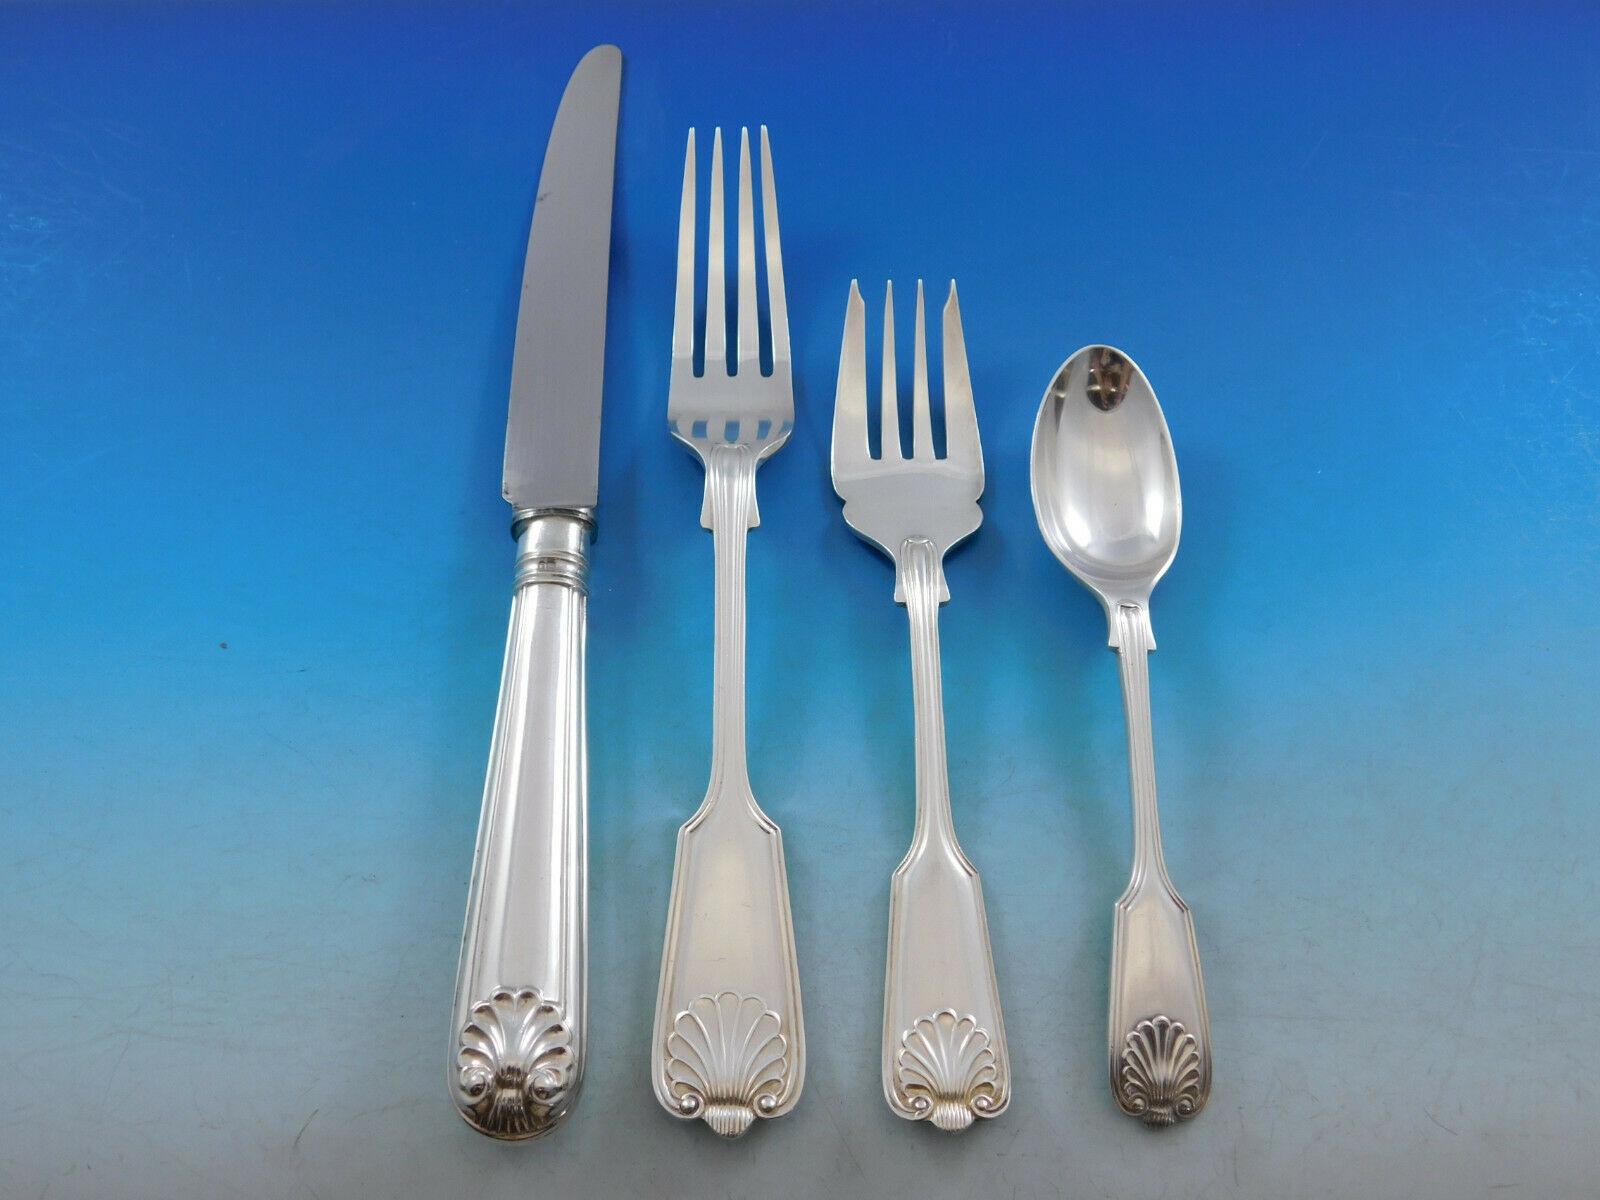 C.J. Vander was the last of England's preeminent silver firms, creating exceptional silver masterpieces using the time-honored traditions of the silversmith's art. In fact, they were one of the last remaining English flatware makers to employ the